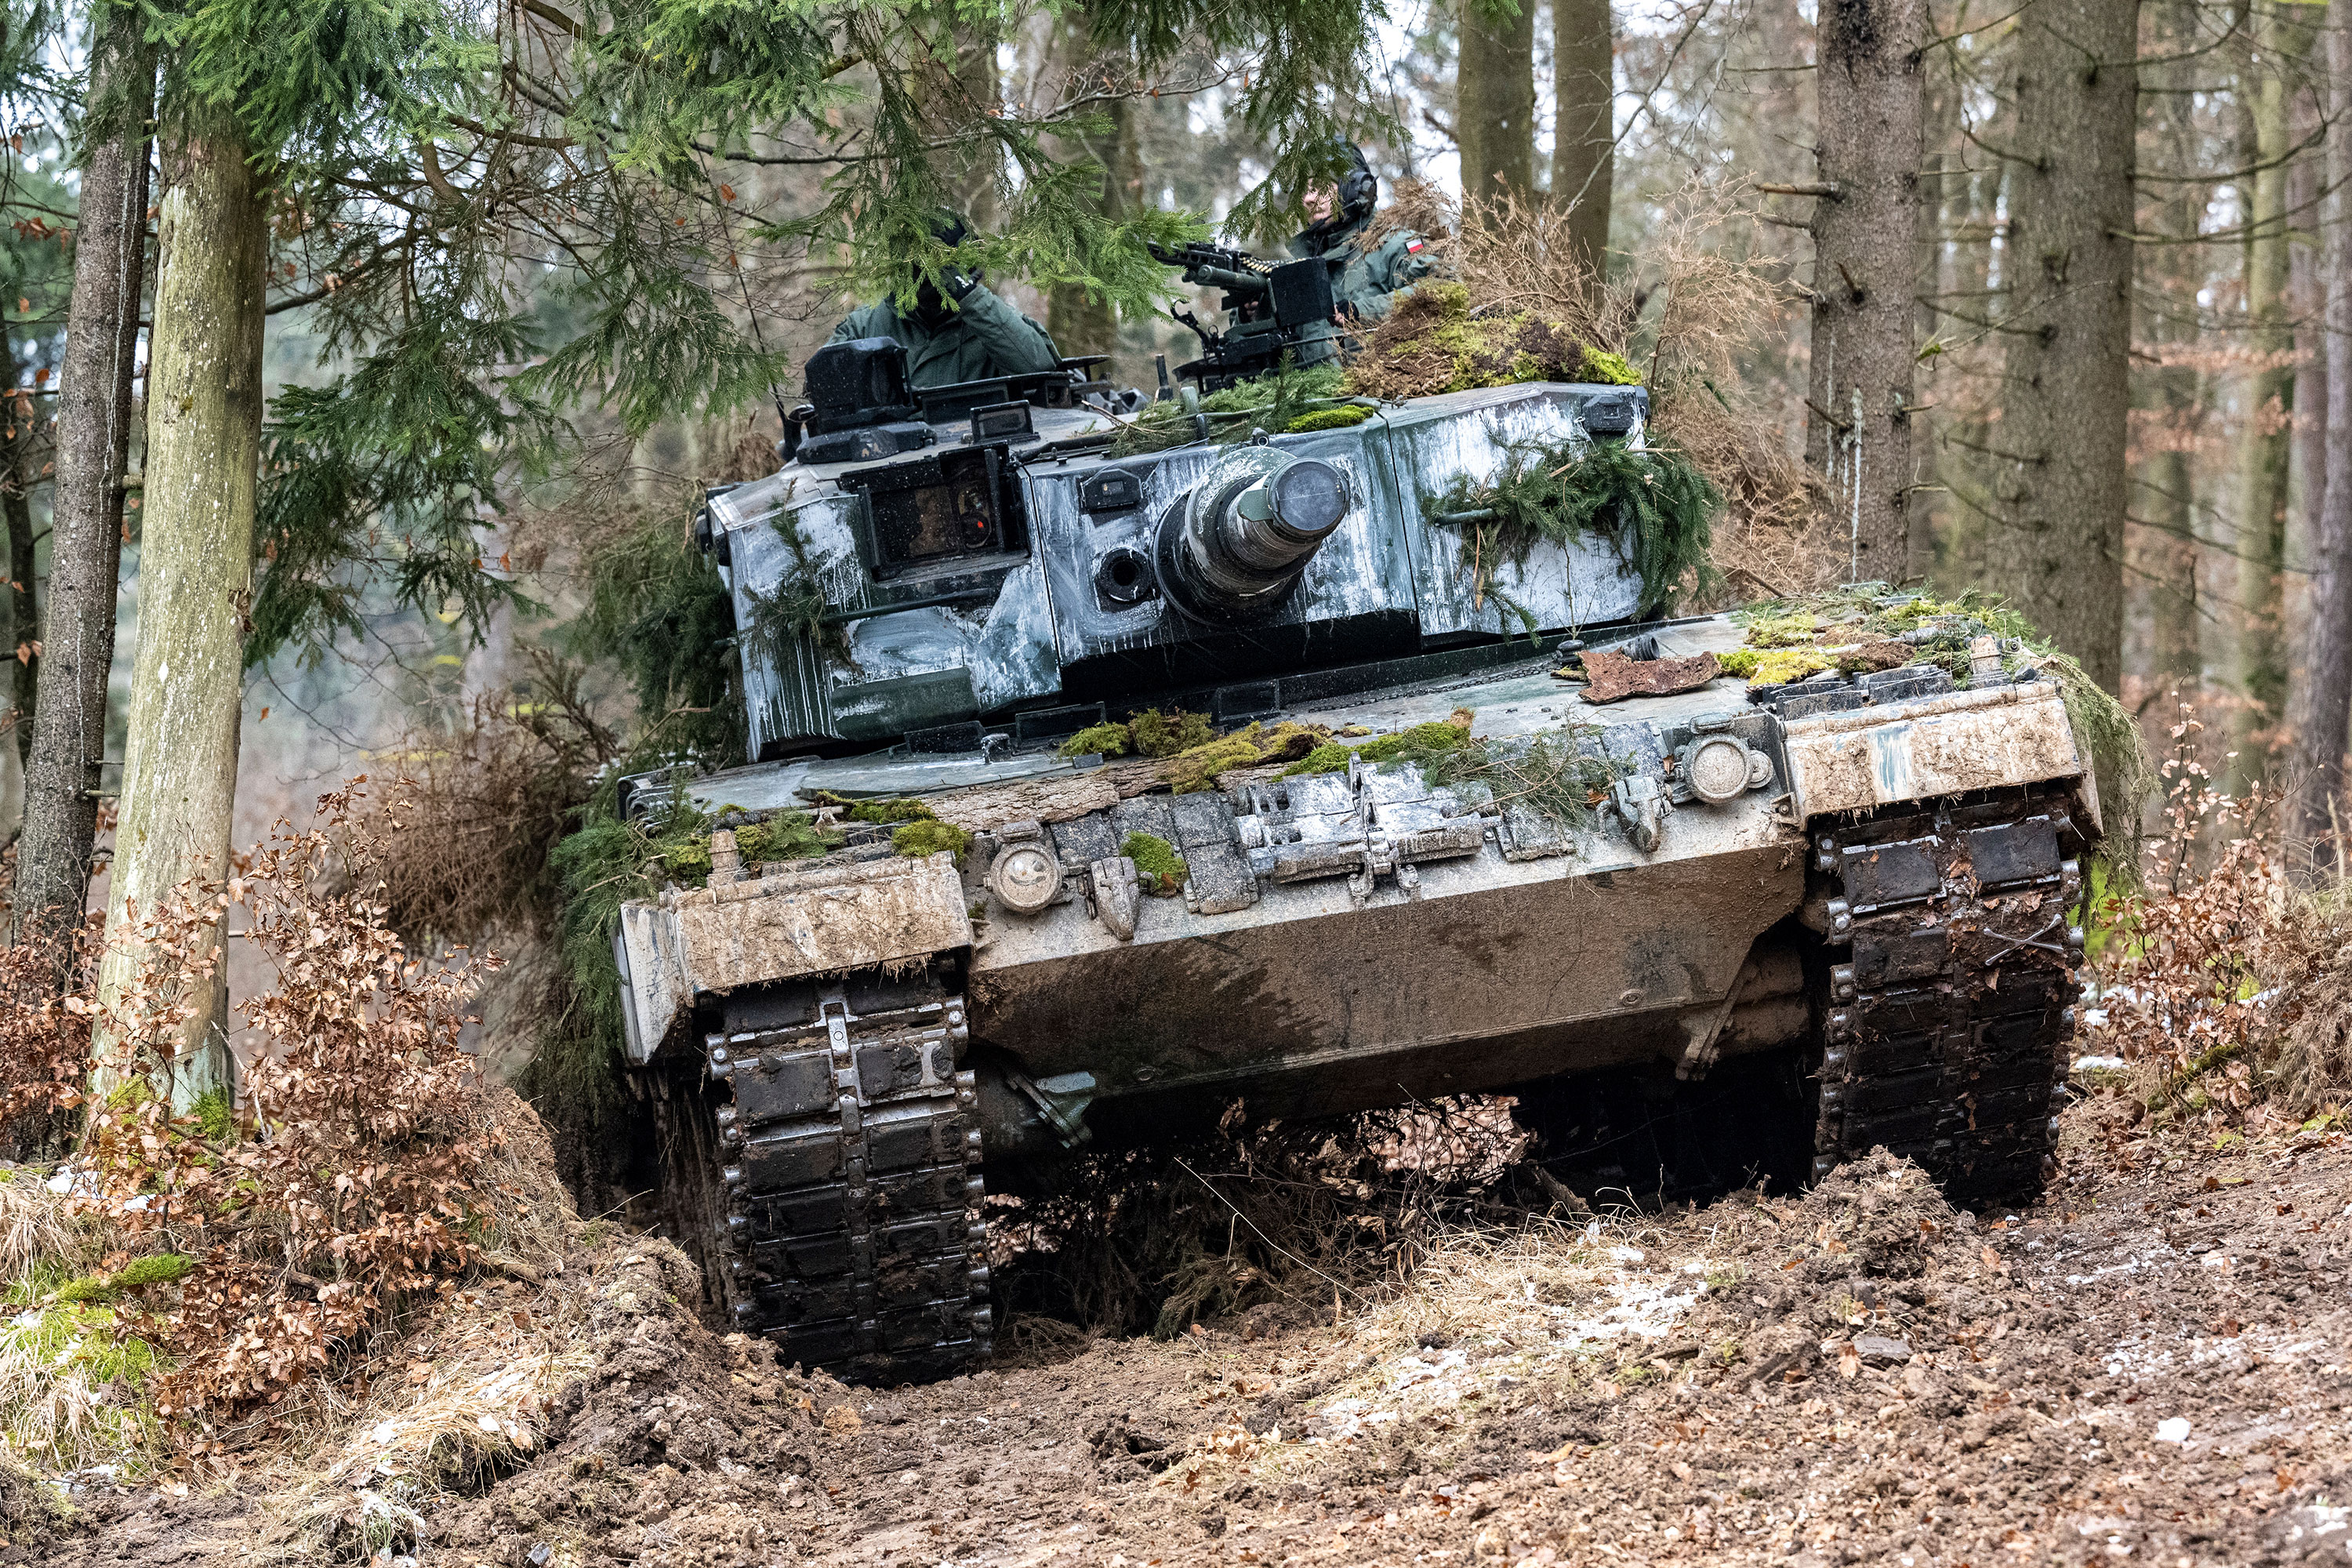 A Polish Leopard 2 stands in a wooded area during an international military exercise "Allied Spirit 2022" in Bavaria, Hohenfels, Germany on January 27, 2022.